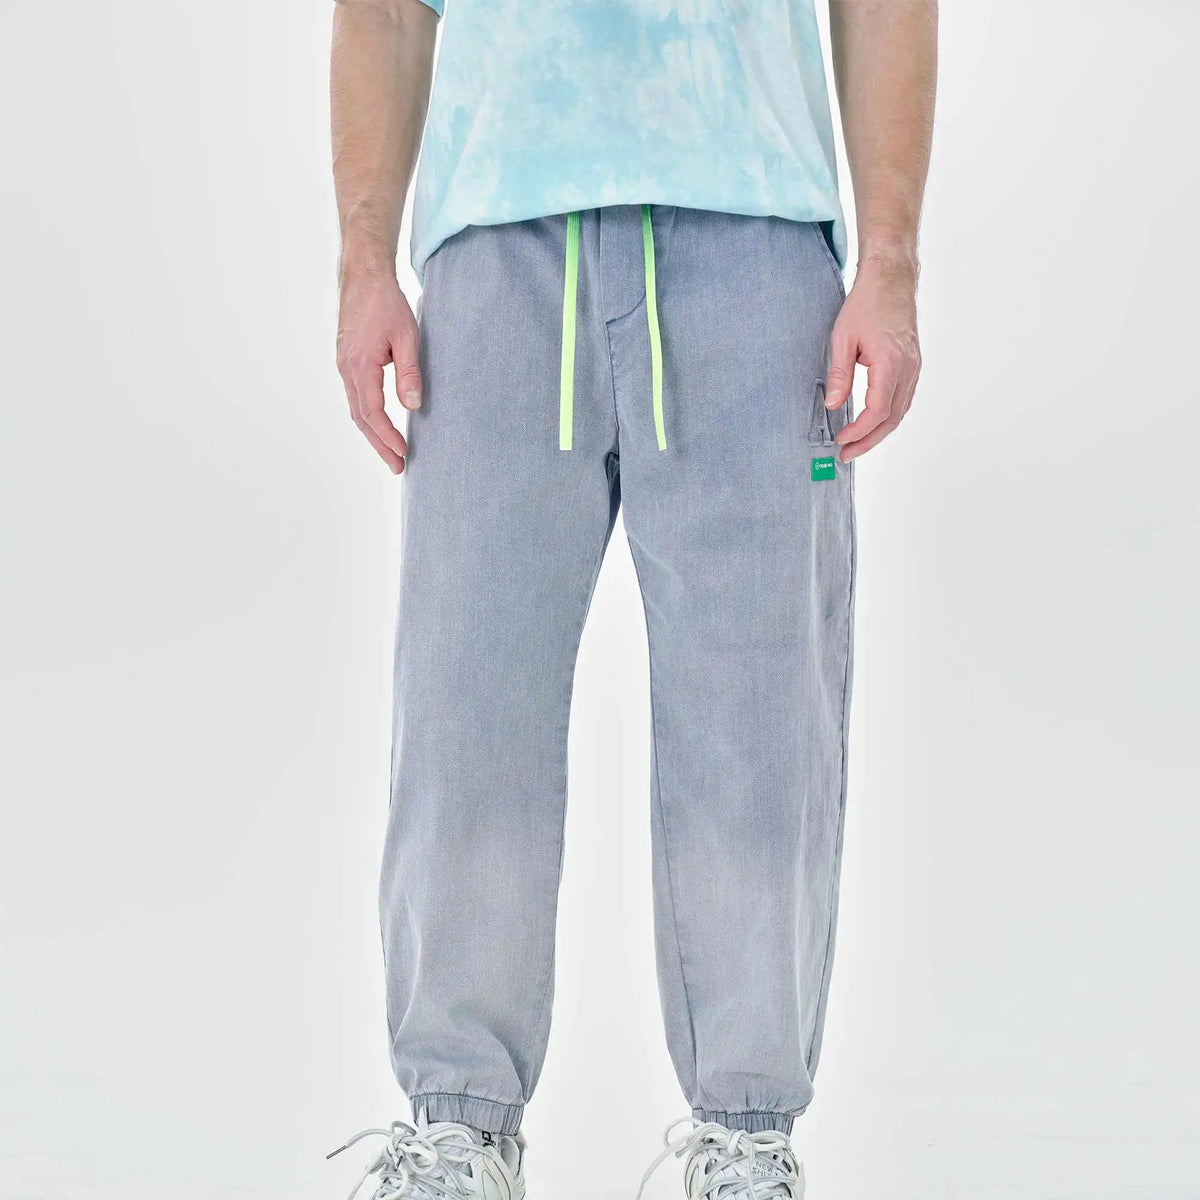 Ankle-Tied Casual Pants For Men